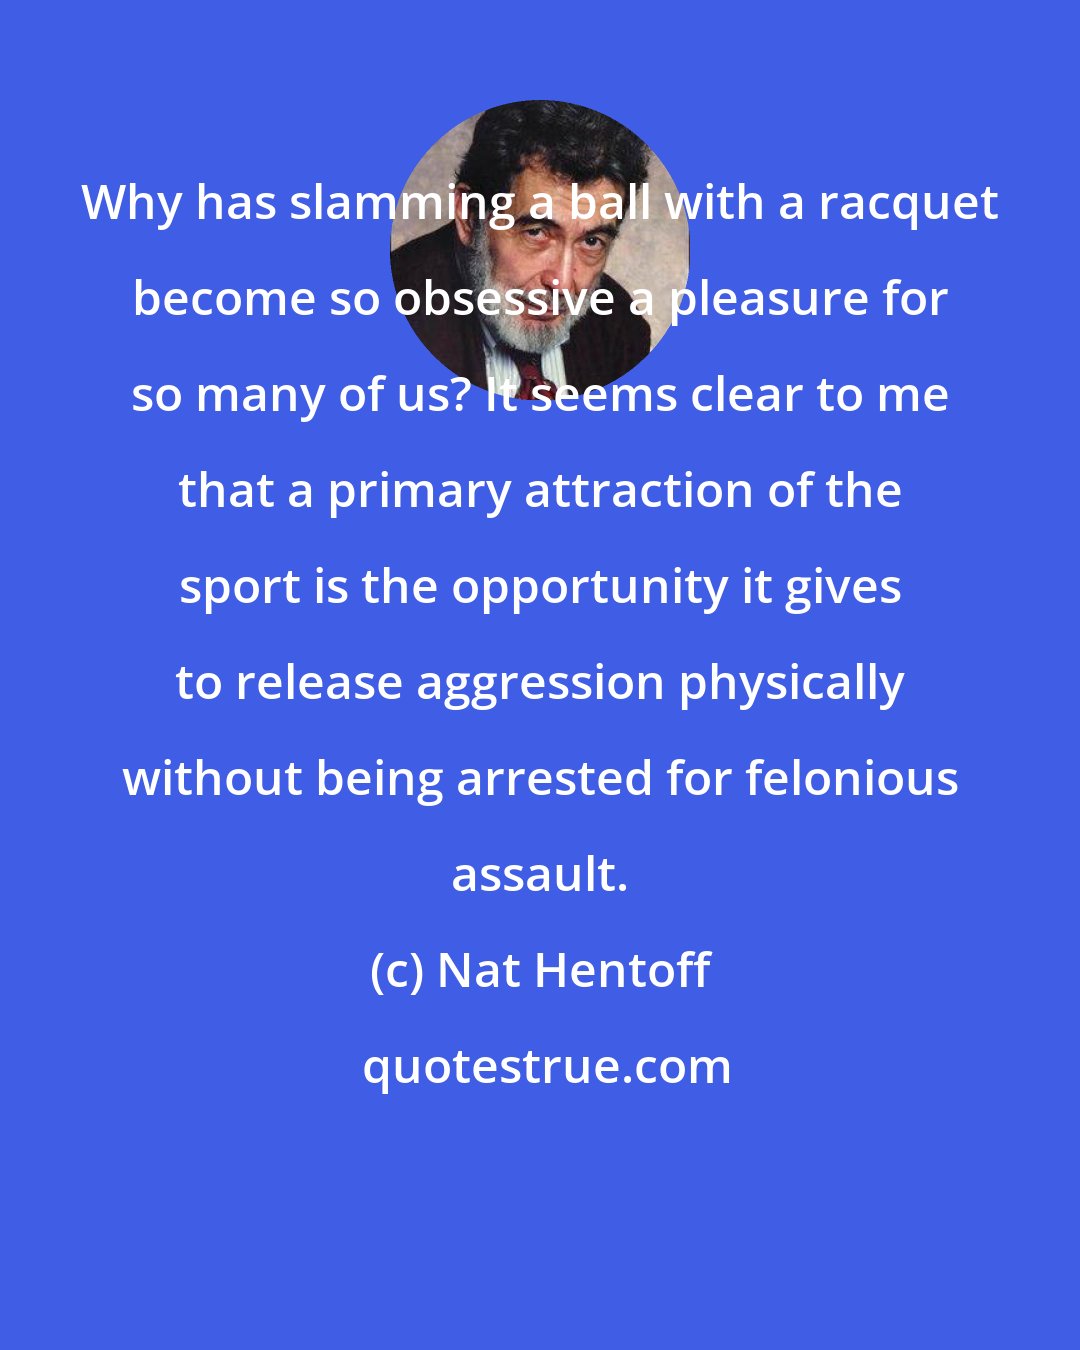 Nat Hentoff: Why has slamming a ball with a racquet become so obsessive a pleasure for so many of us? It seems clear to me that a primary attraction of the sport is the opportunity it gives to release aggression physically without being arrested for felonious assault.